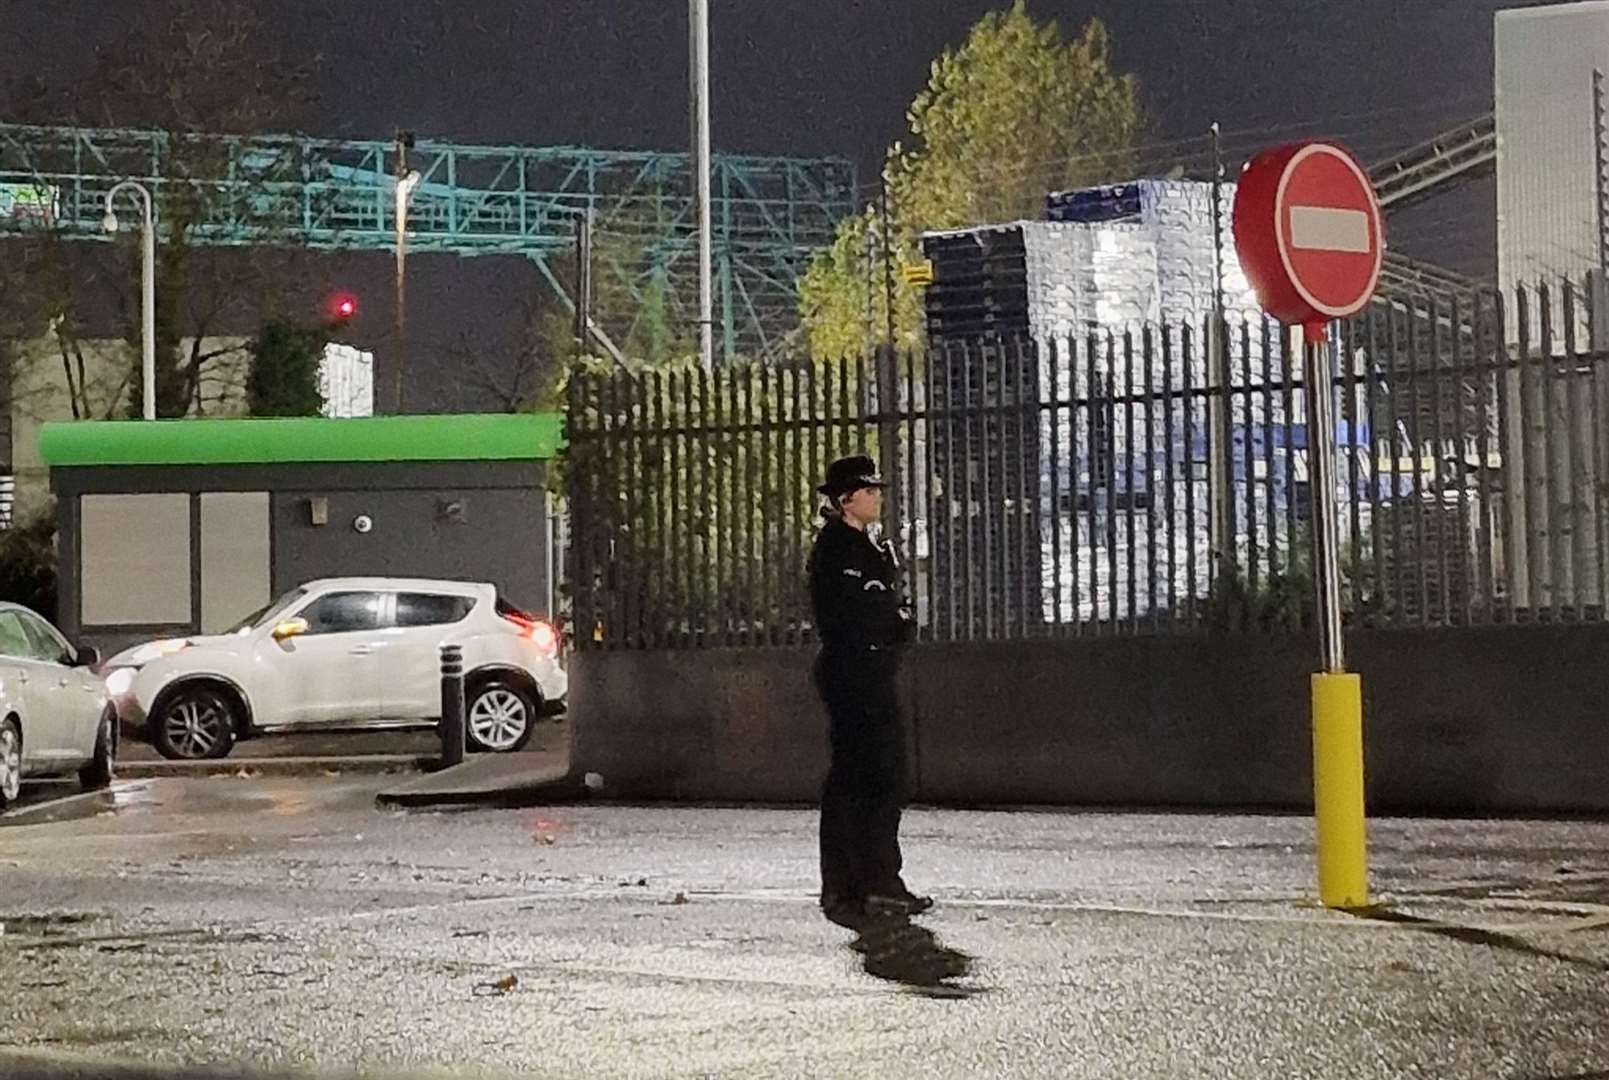 Police were at Asda following an incident last night